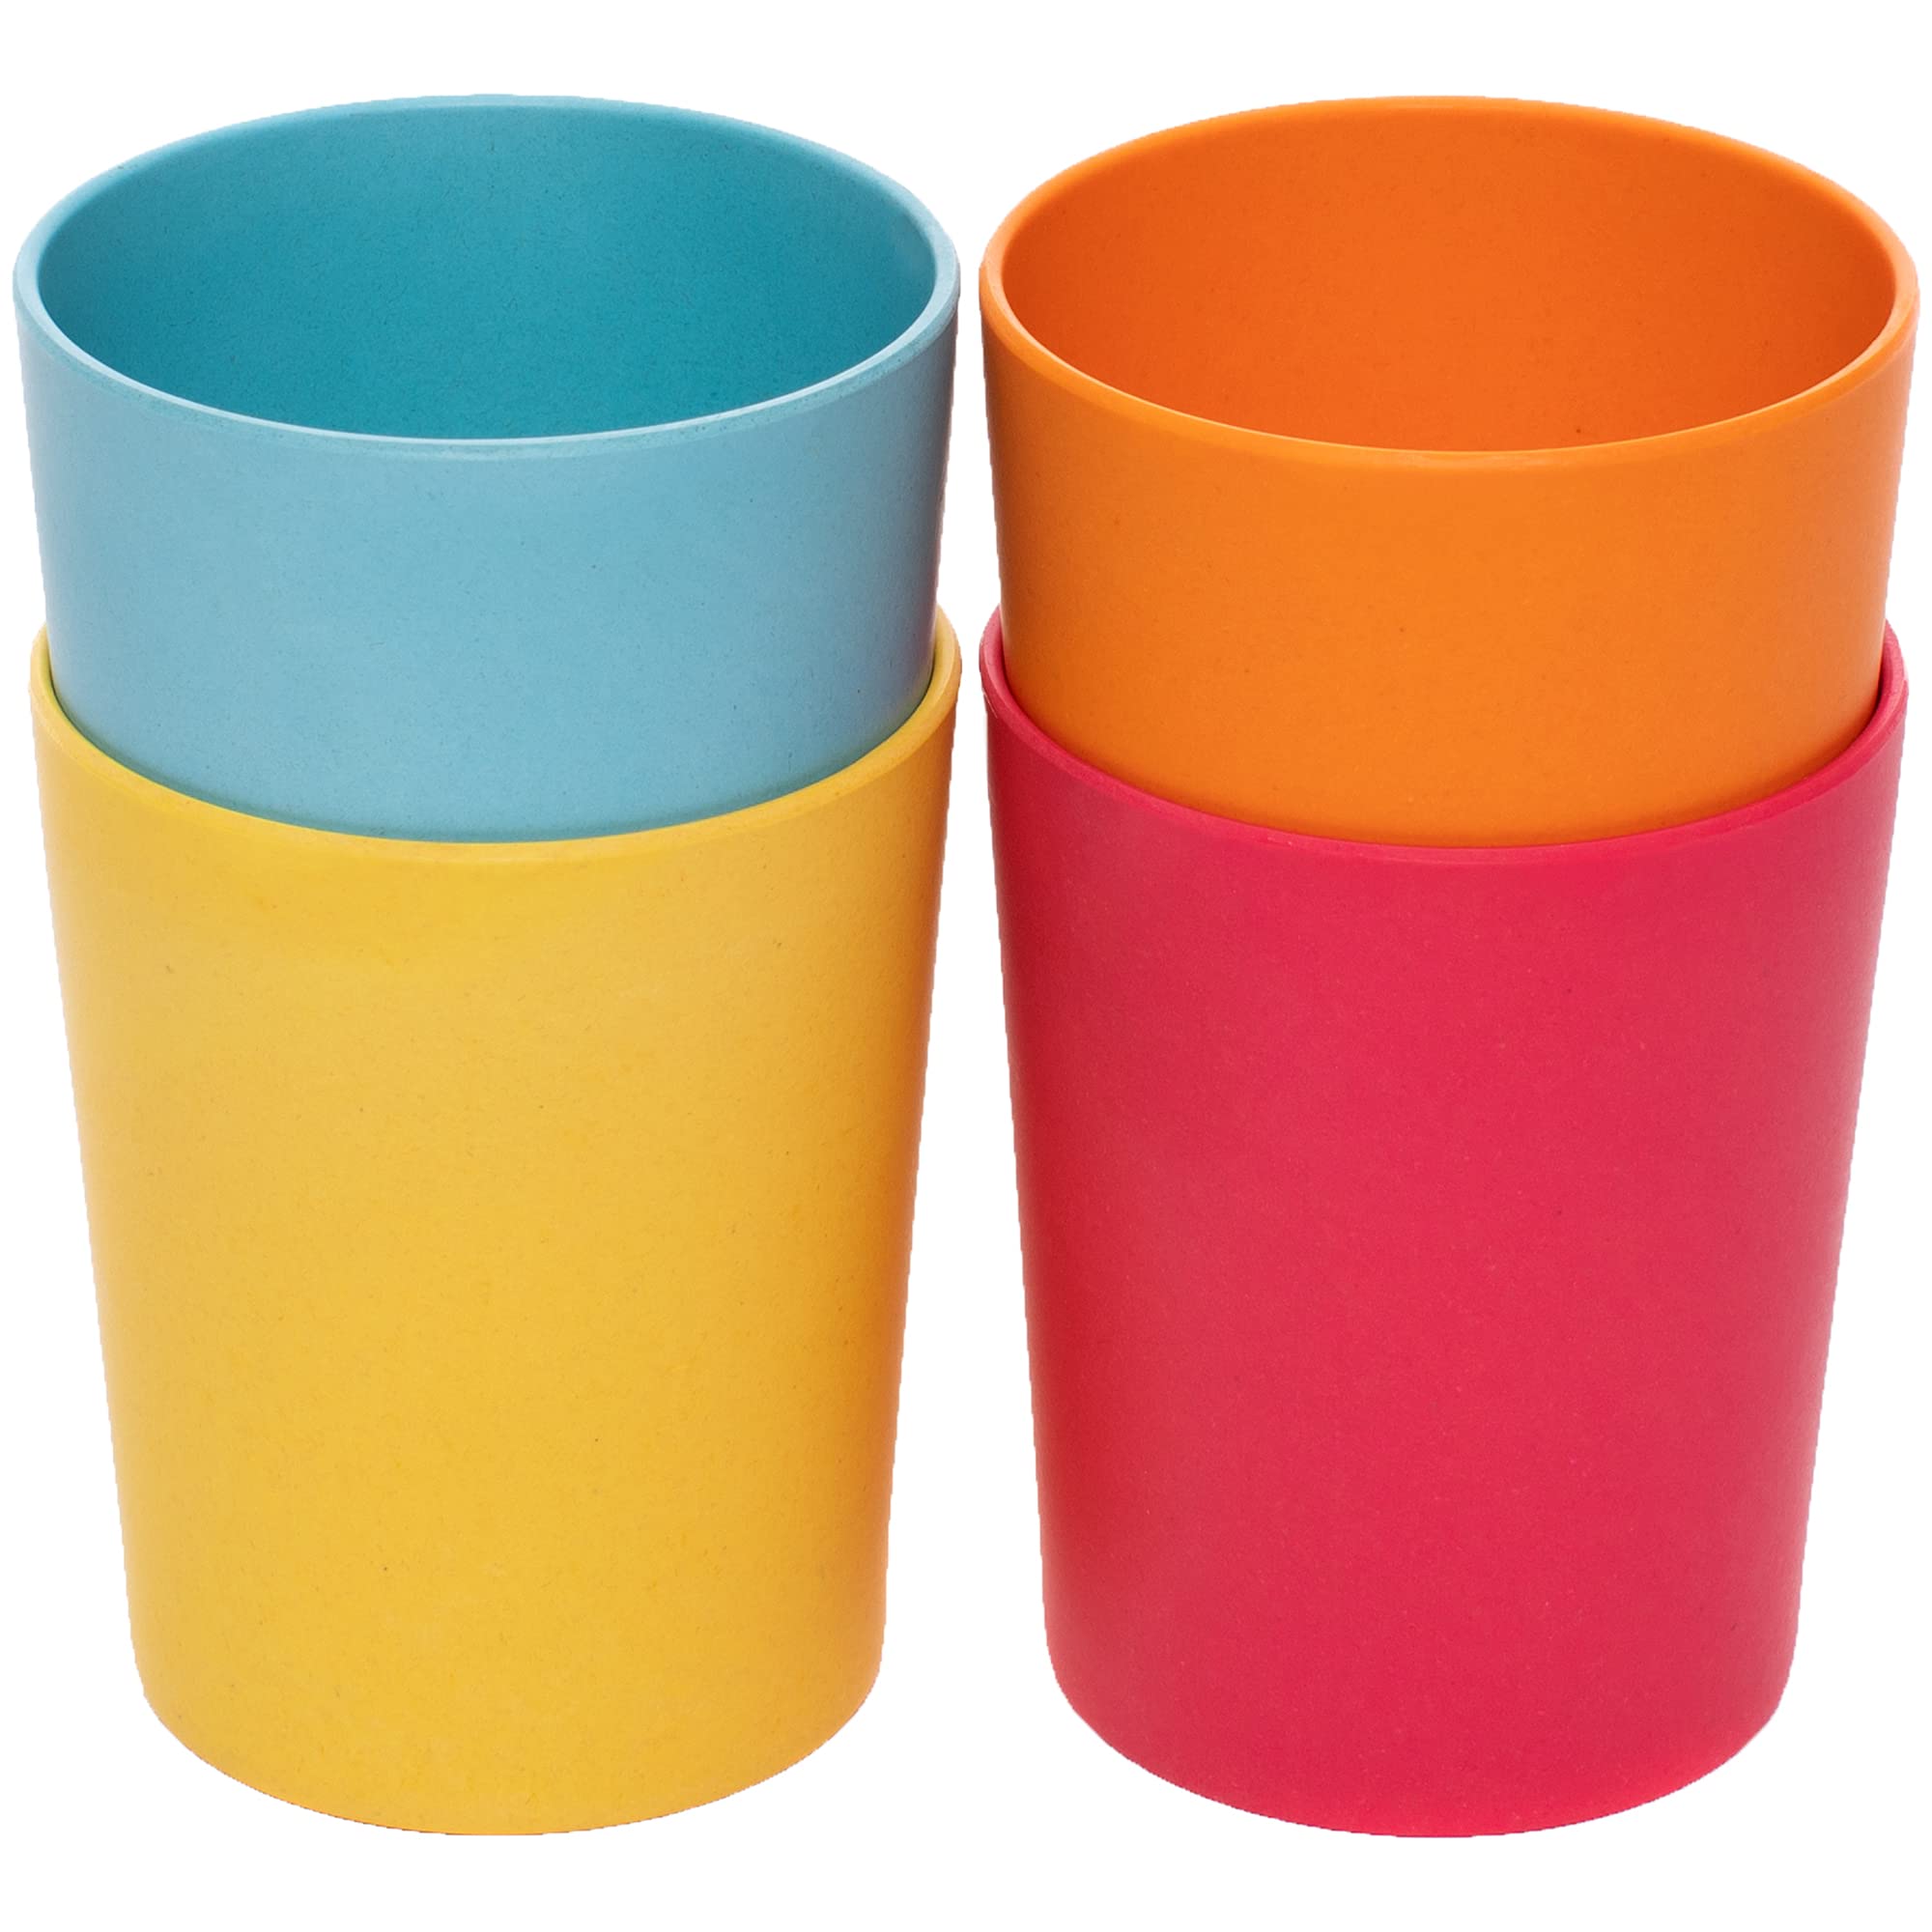 WeeSprout Bamboo Toddler Cups - 4 pc Set (10 fl oz) Organic & Non-Plastic  Cup Pack for Toddlers Big Kids or Baby Natural 10 oz (Without Lids) Blue  Yellow Orange & Red